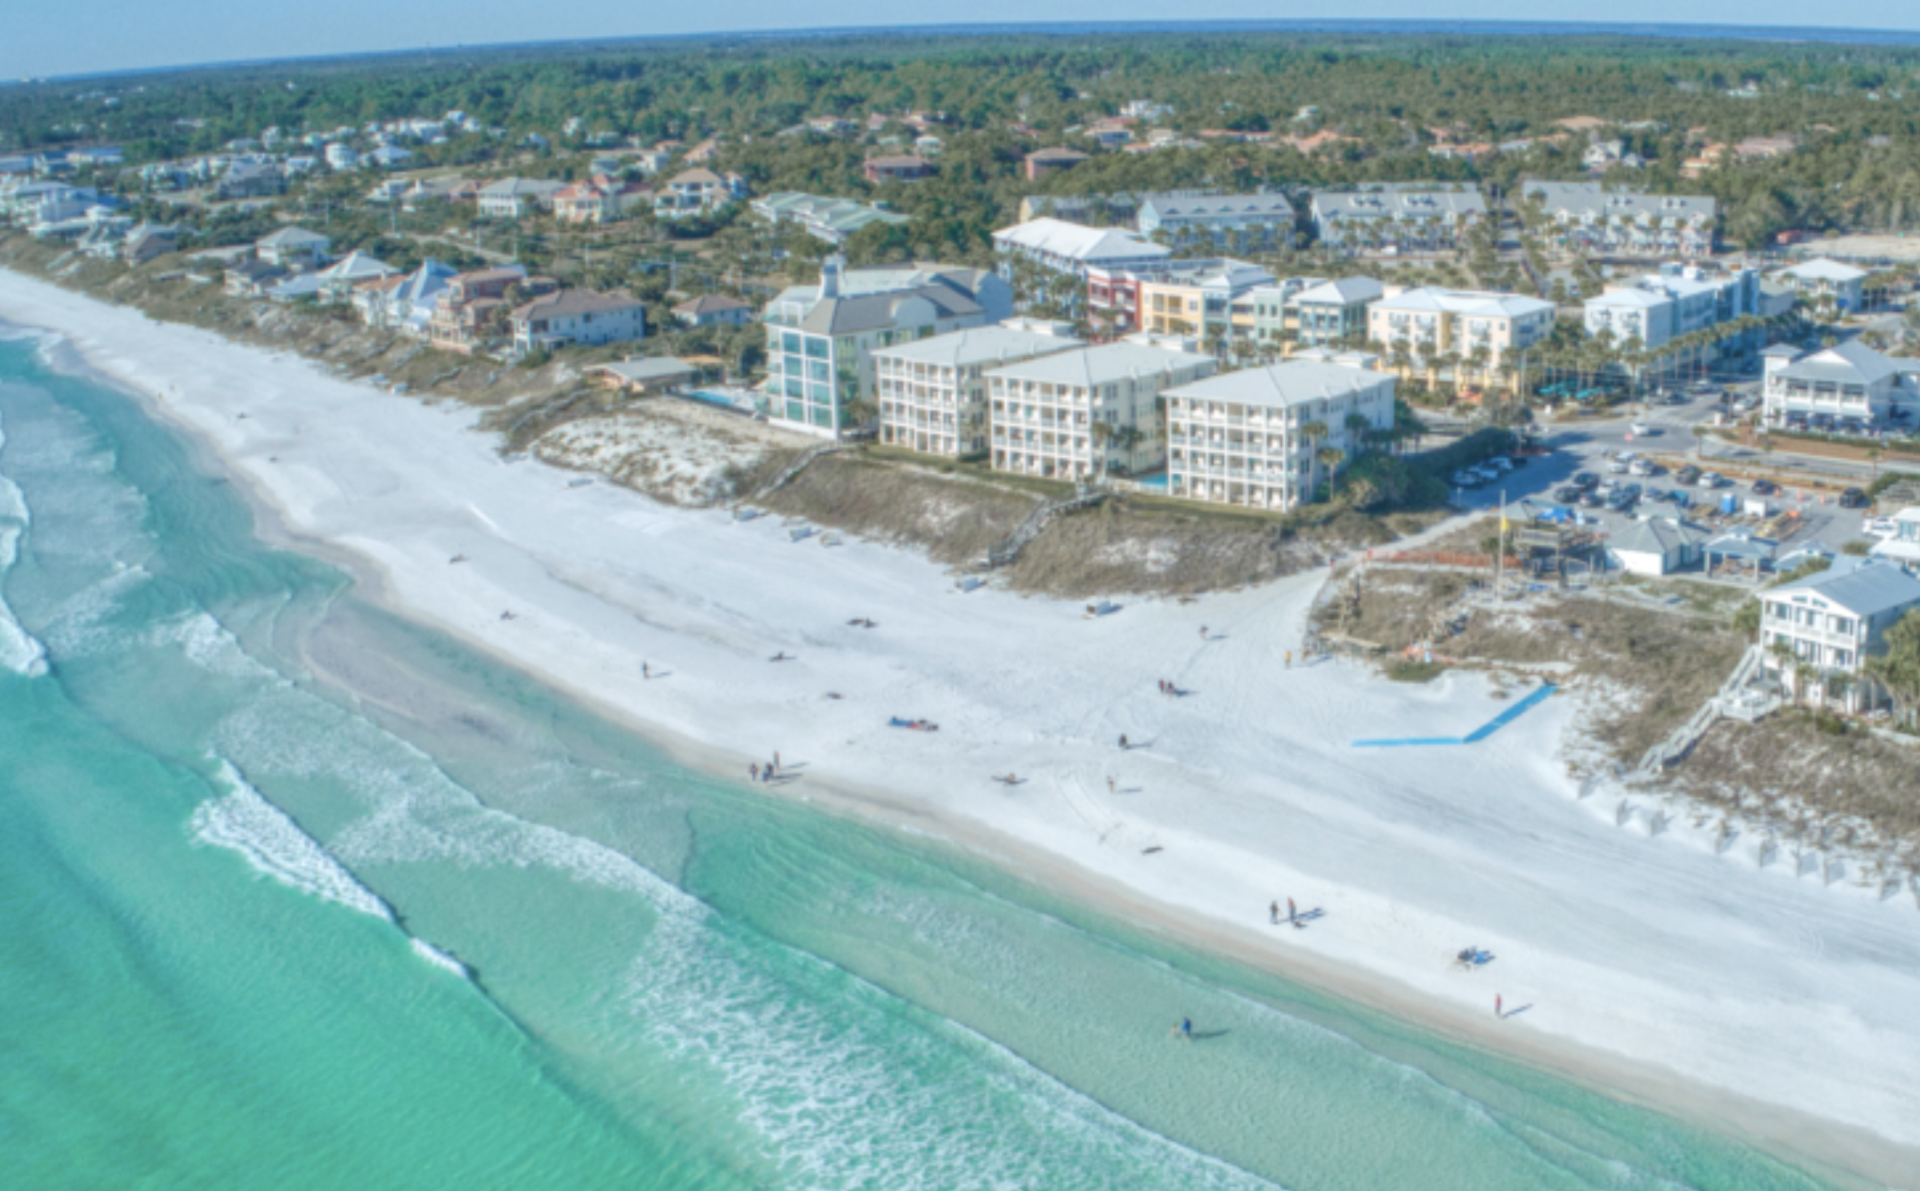 TIPS FOR PLANNING YOUR 30A VACATION